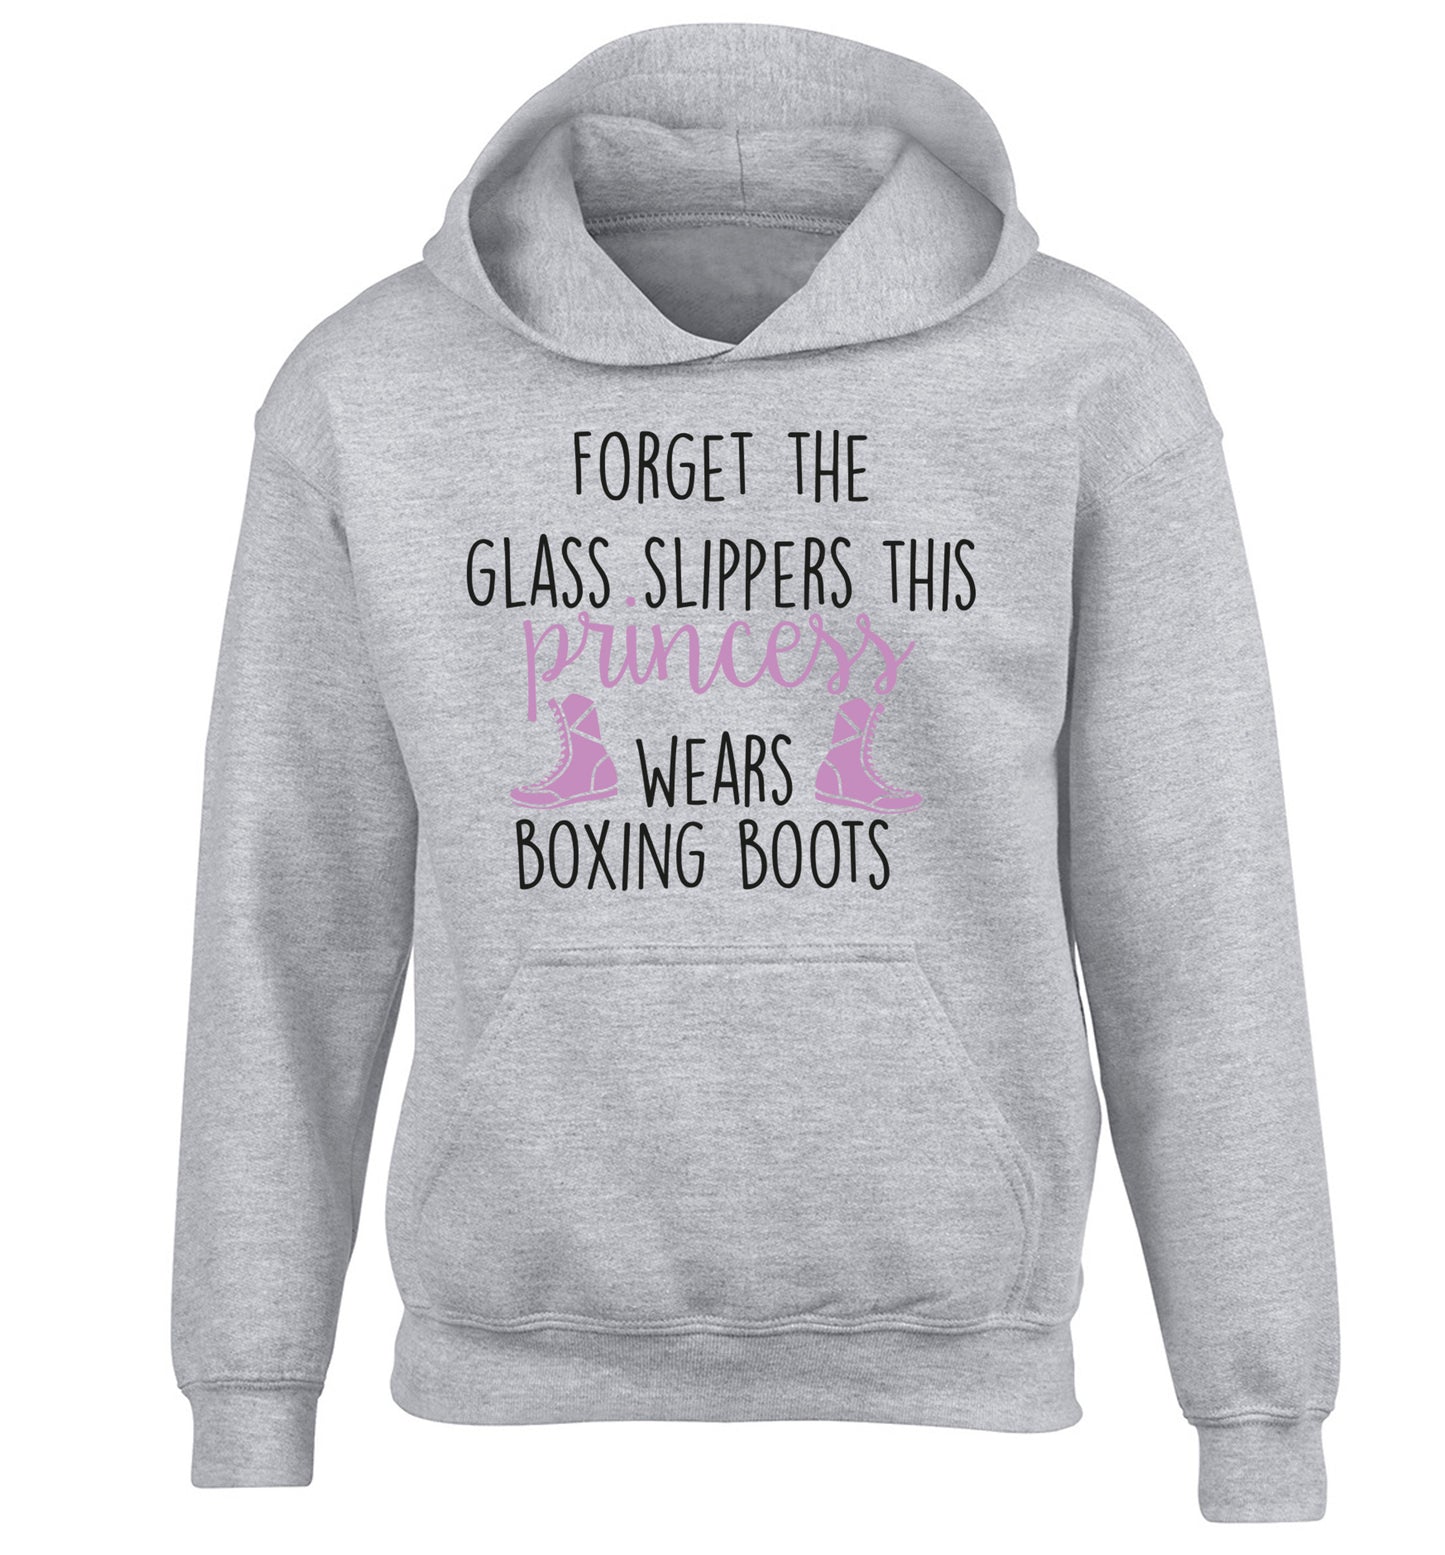 Forget the glass slippers this princess wears boxing boots children's grey hoodie 12-14 Years